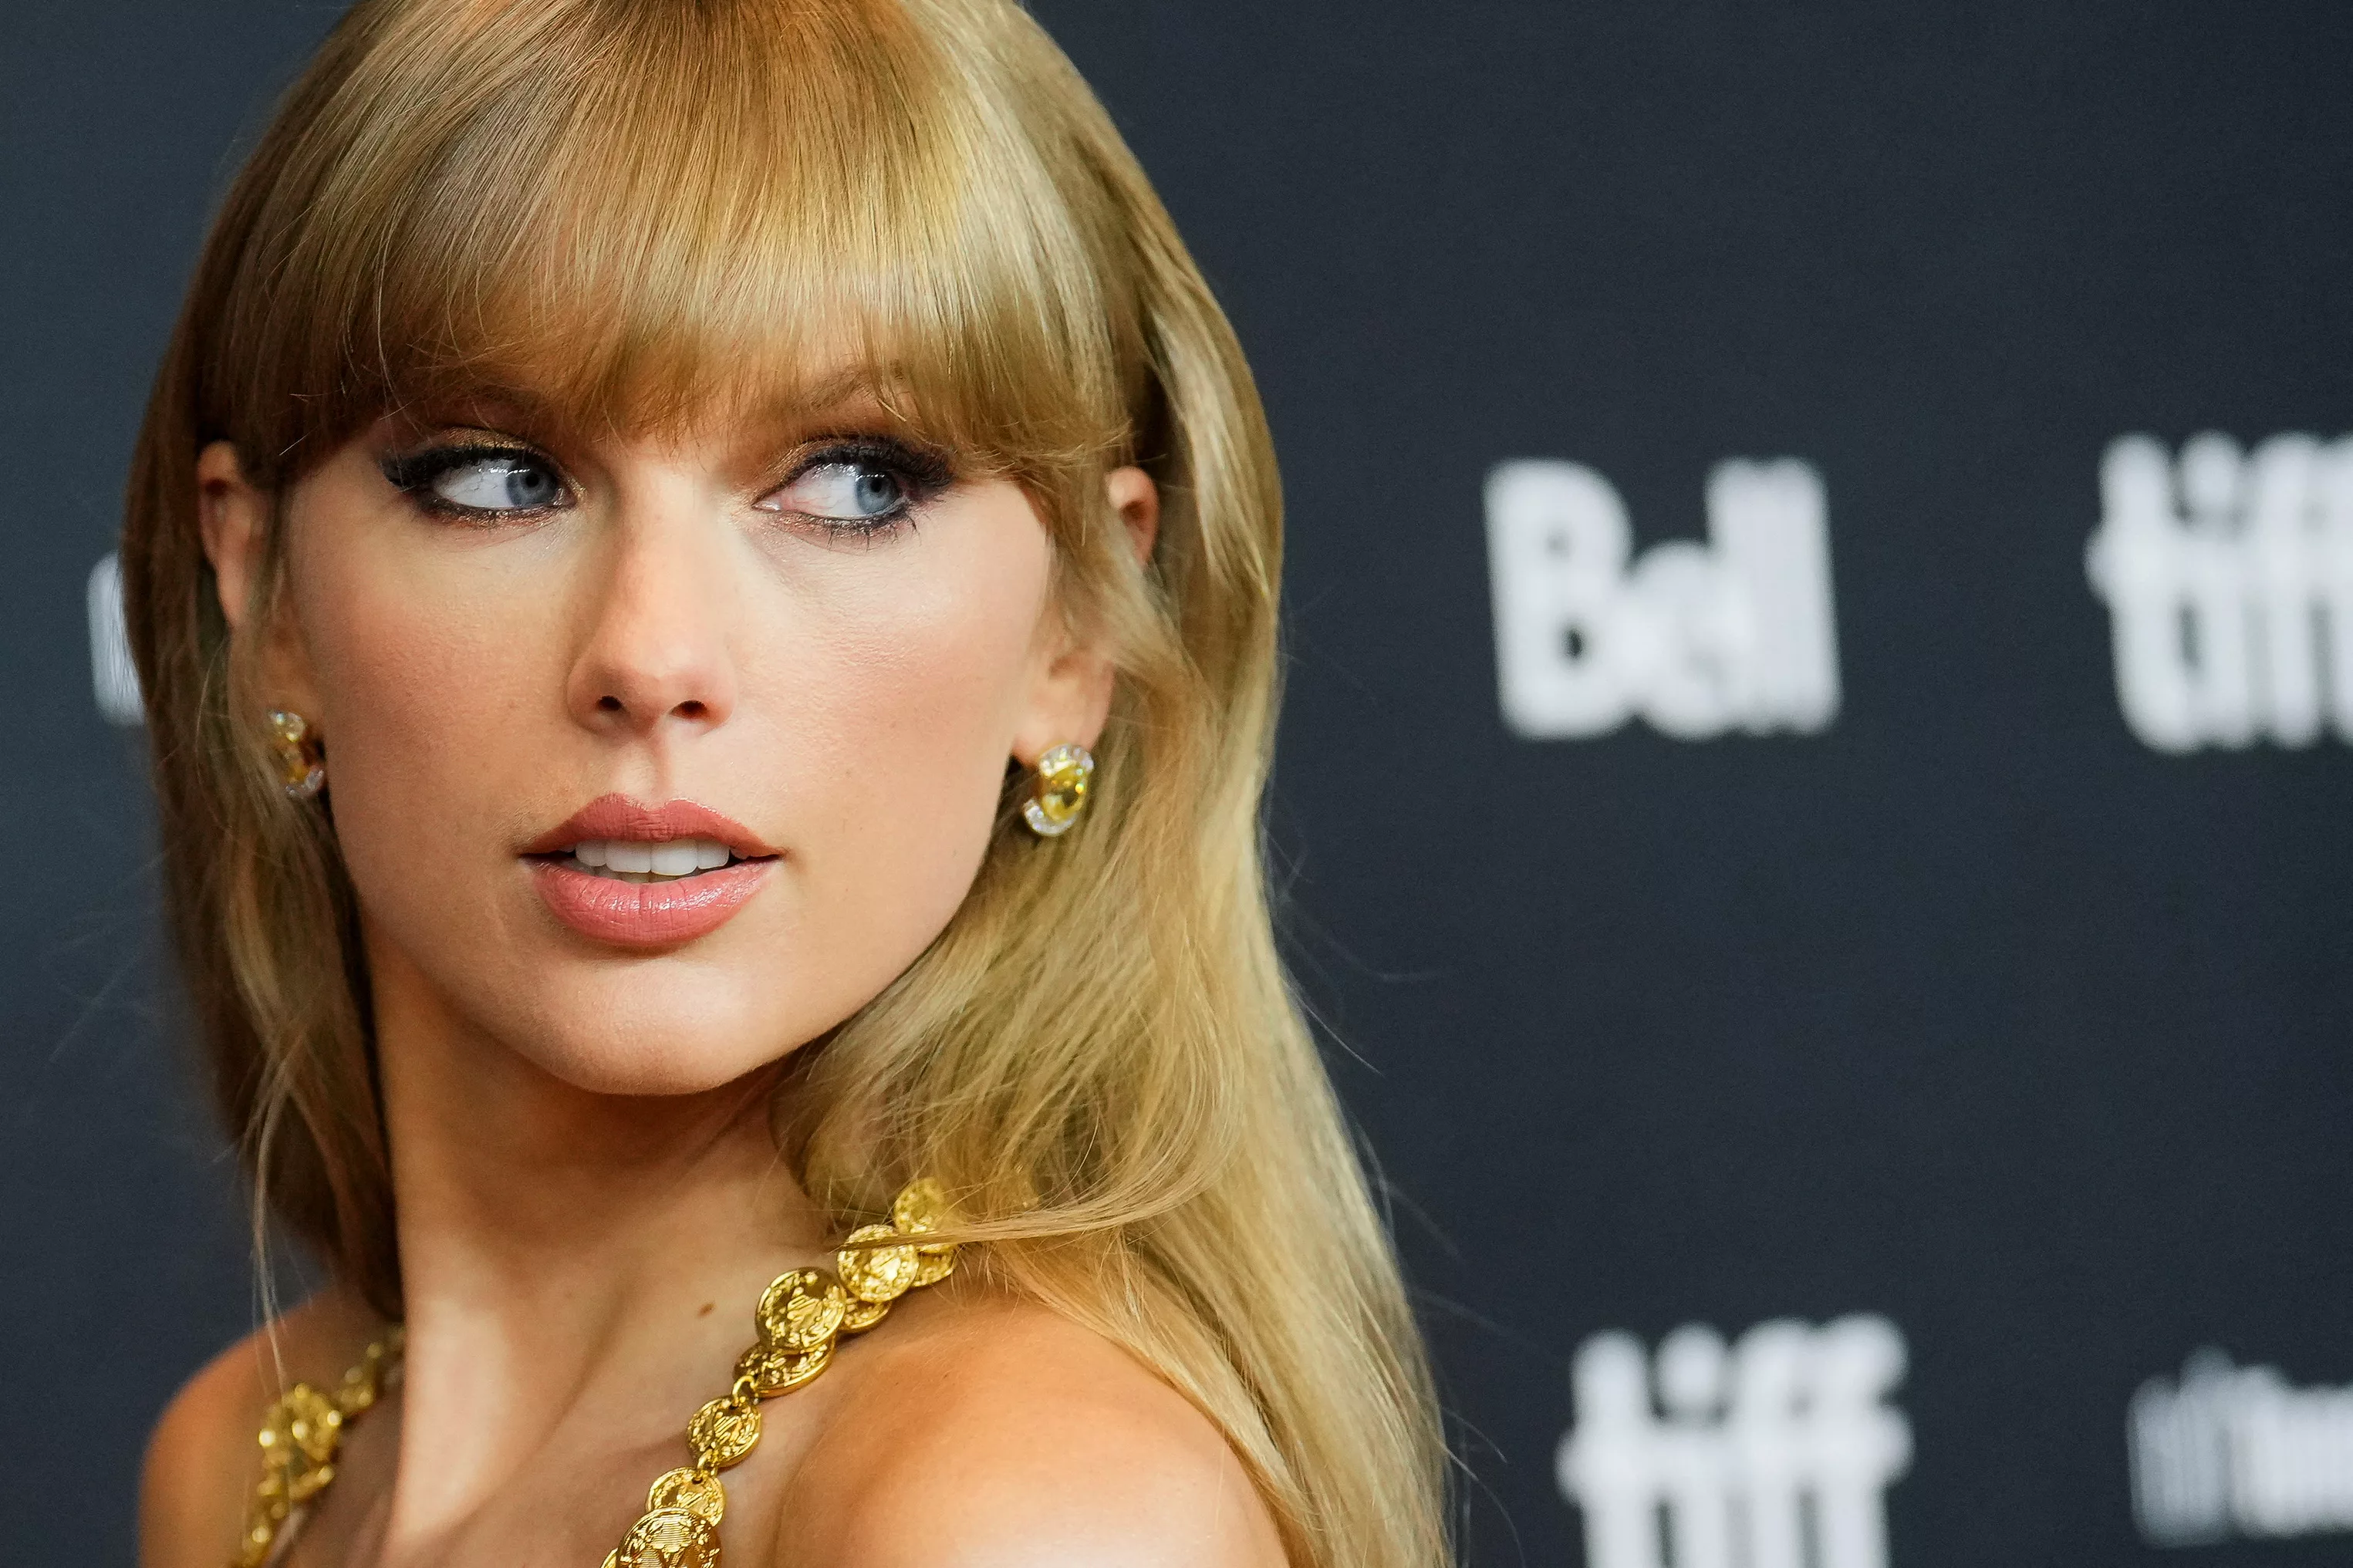 taylor-swift-discusses-her-music-video-all-too-well-at-toronto-film-fest-in-toronto